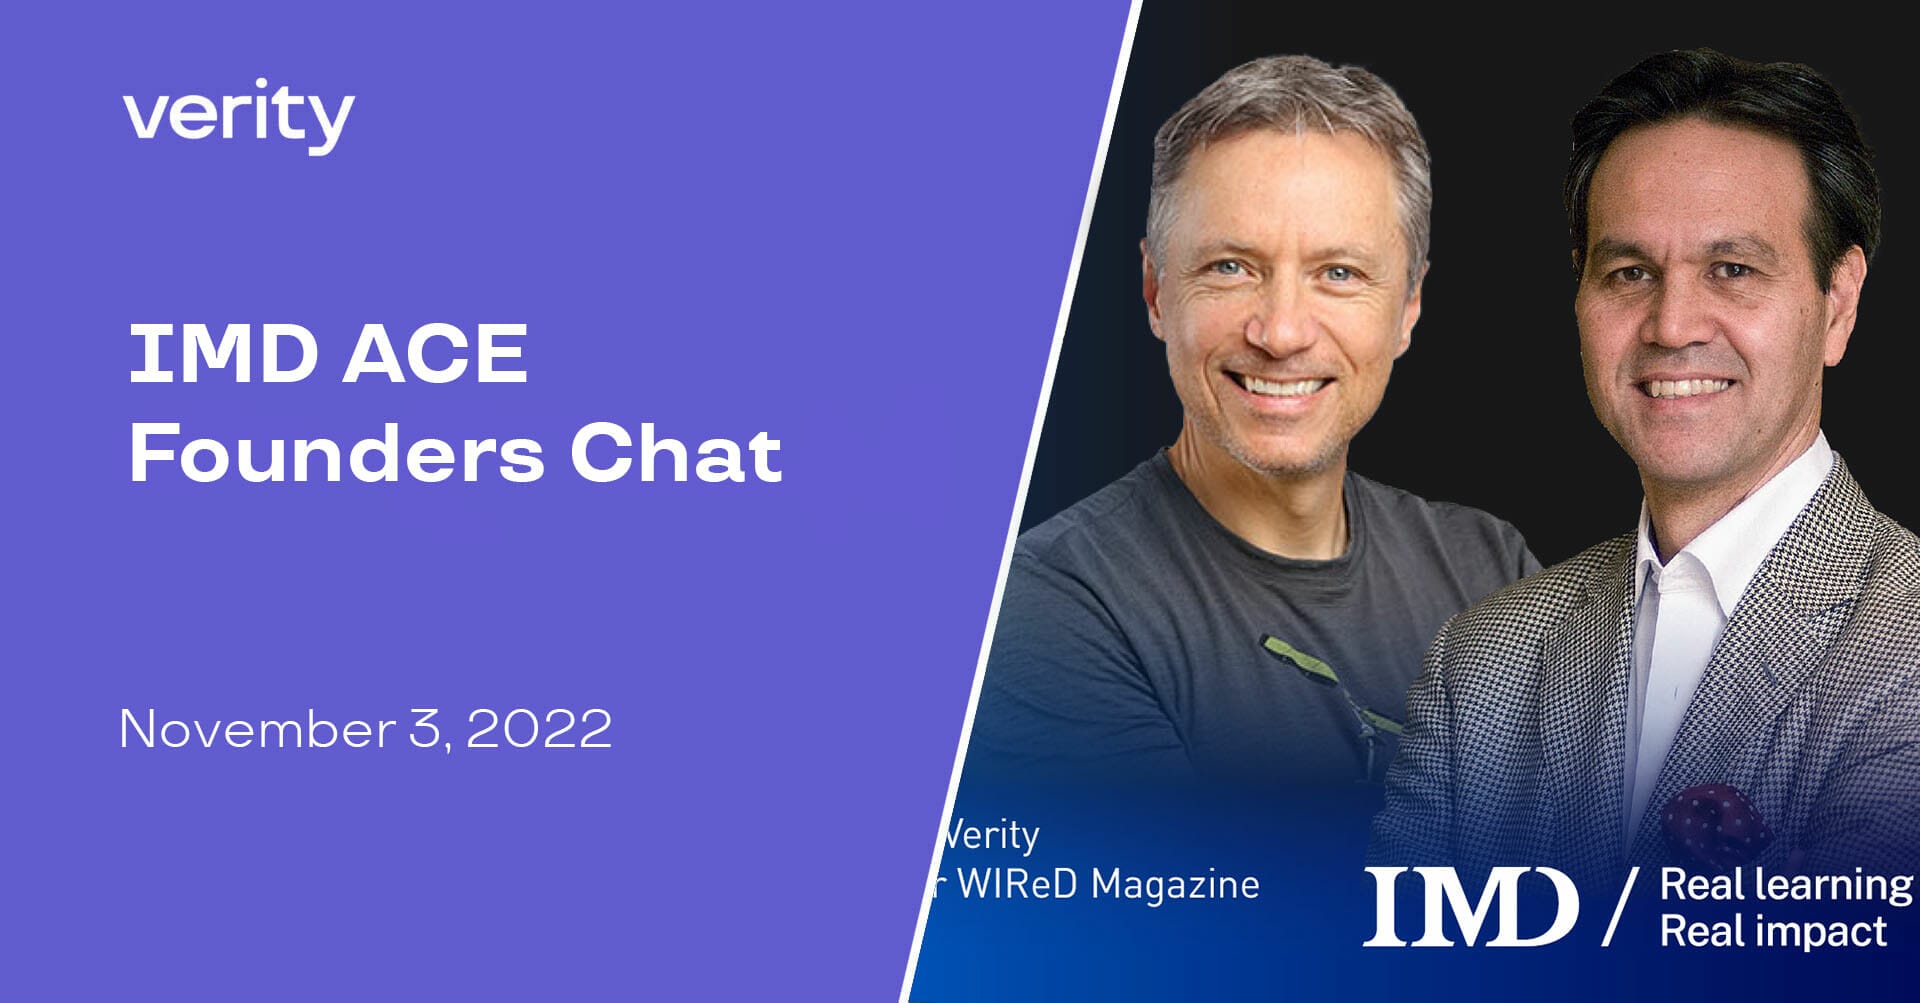 IMD ACE Founders’ Chat